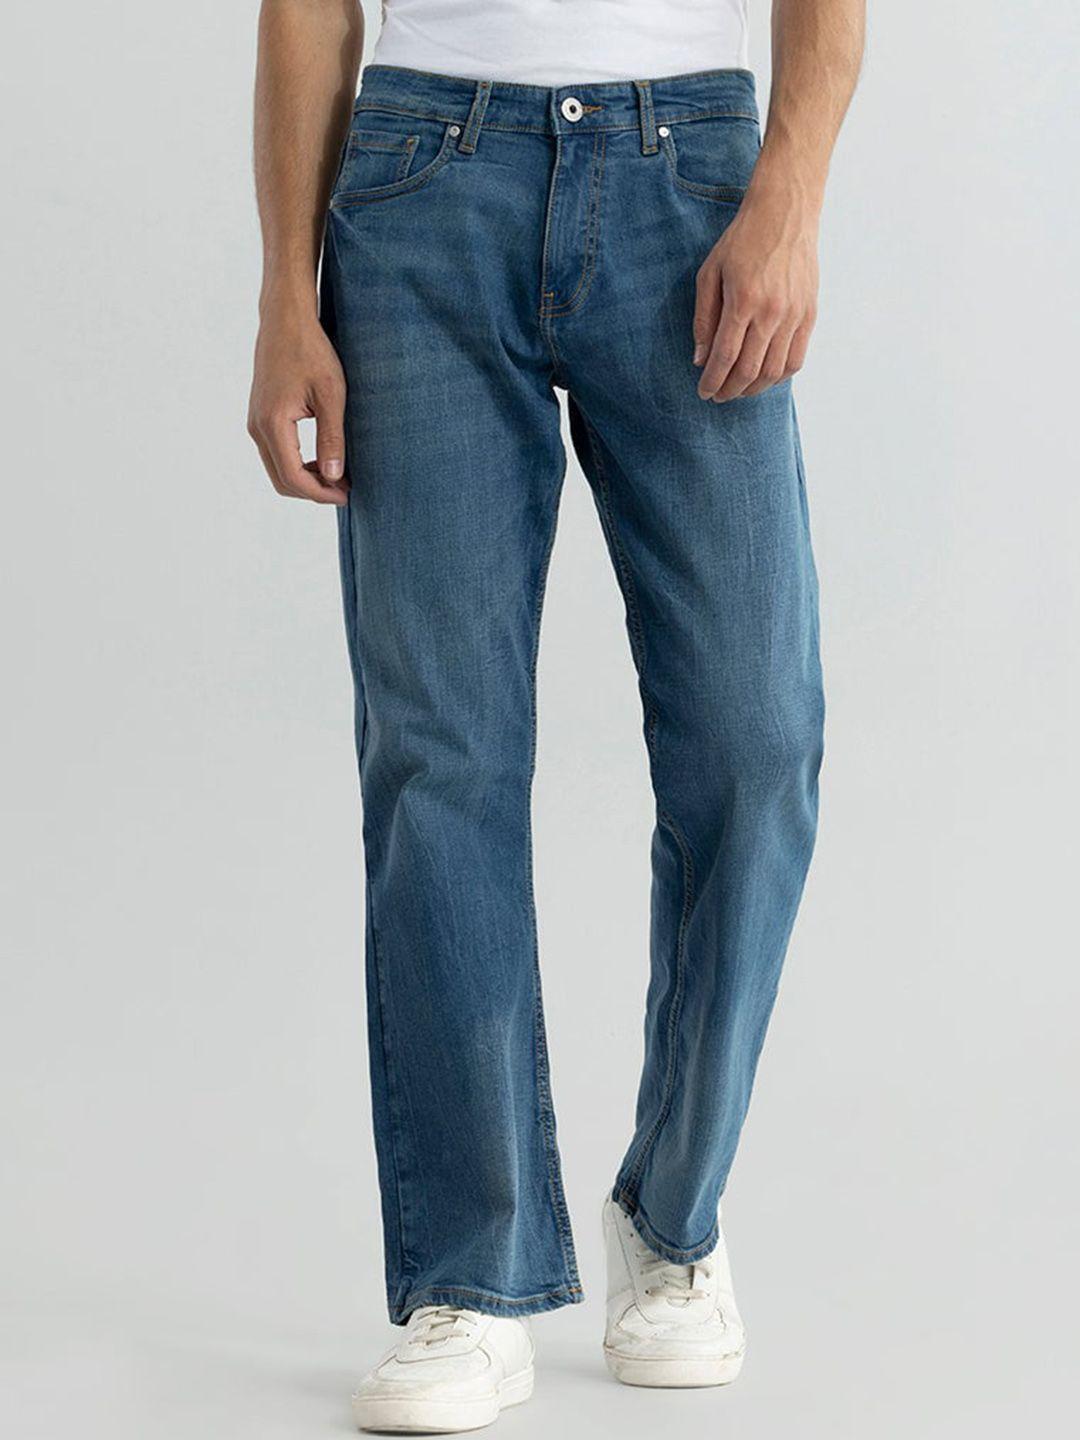 snitch-men-classic-whiskers-and-chevrons-stretchable-clean-look-bootcut-jeans